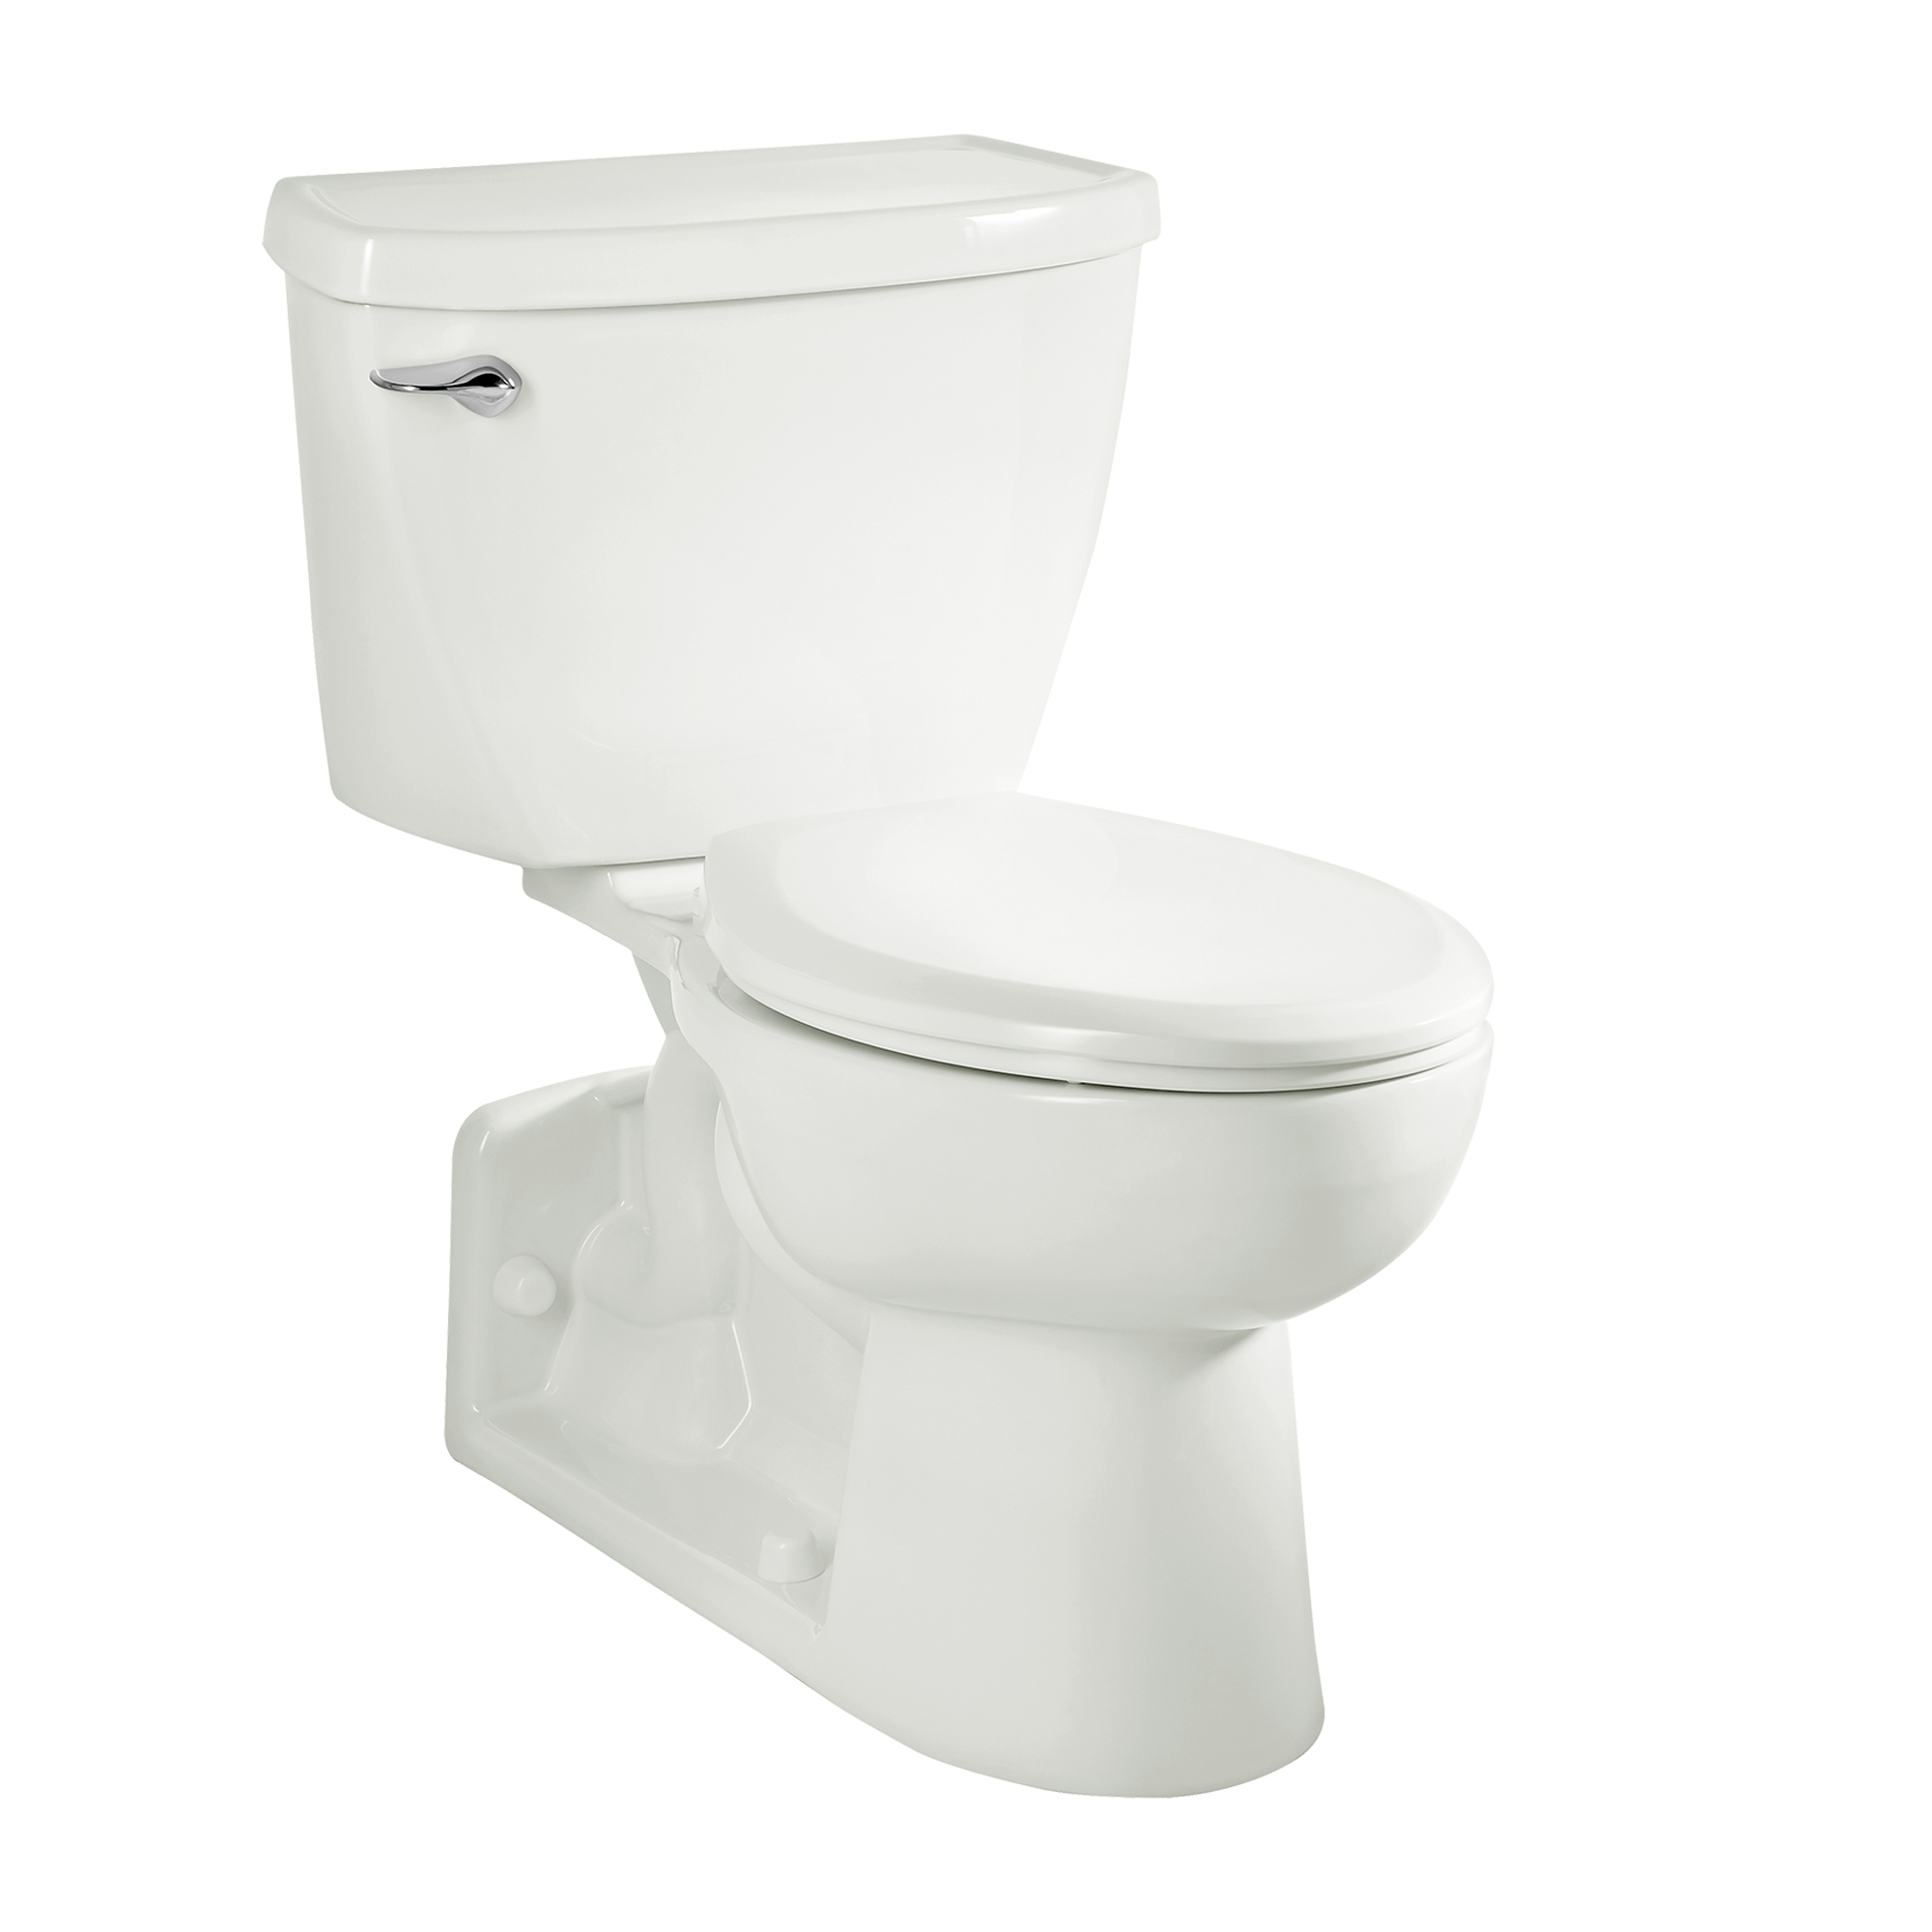 IV. The Top 4 Rear Discharge Toilets in the Market